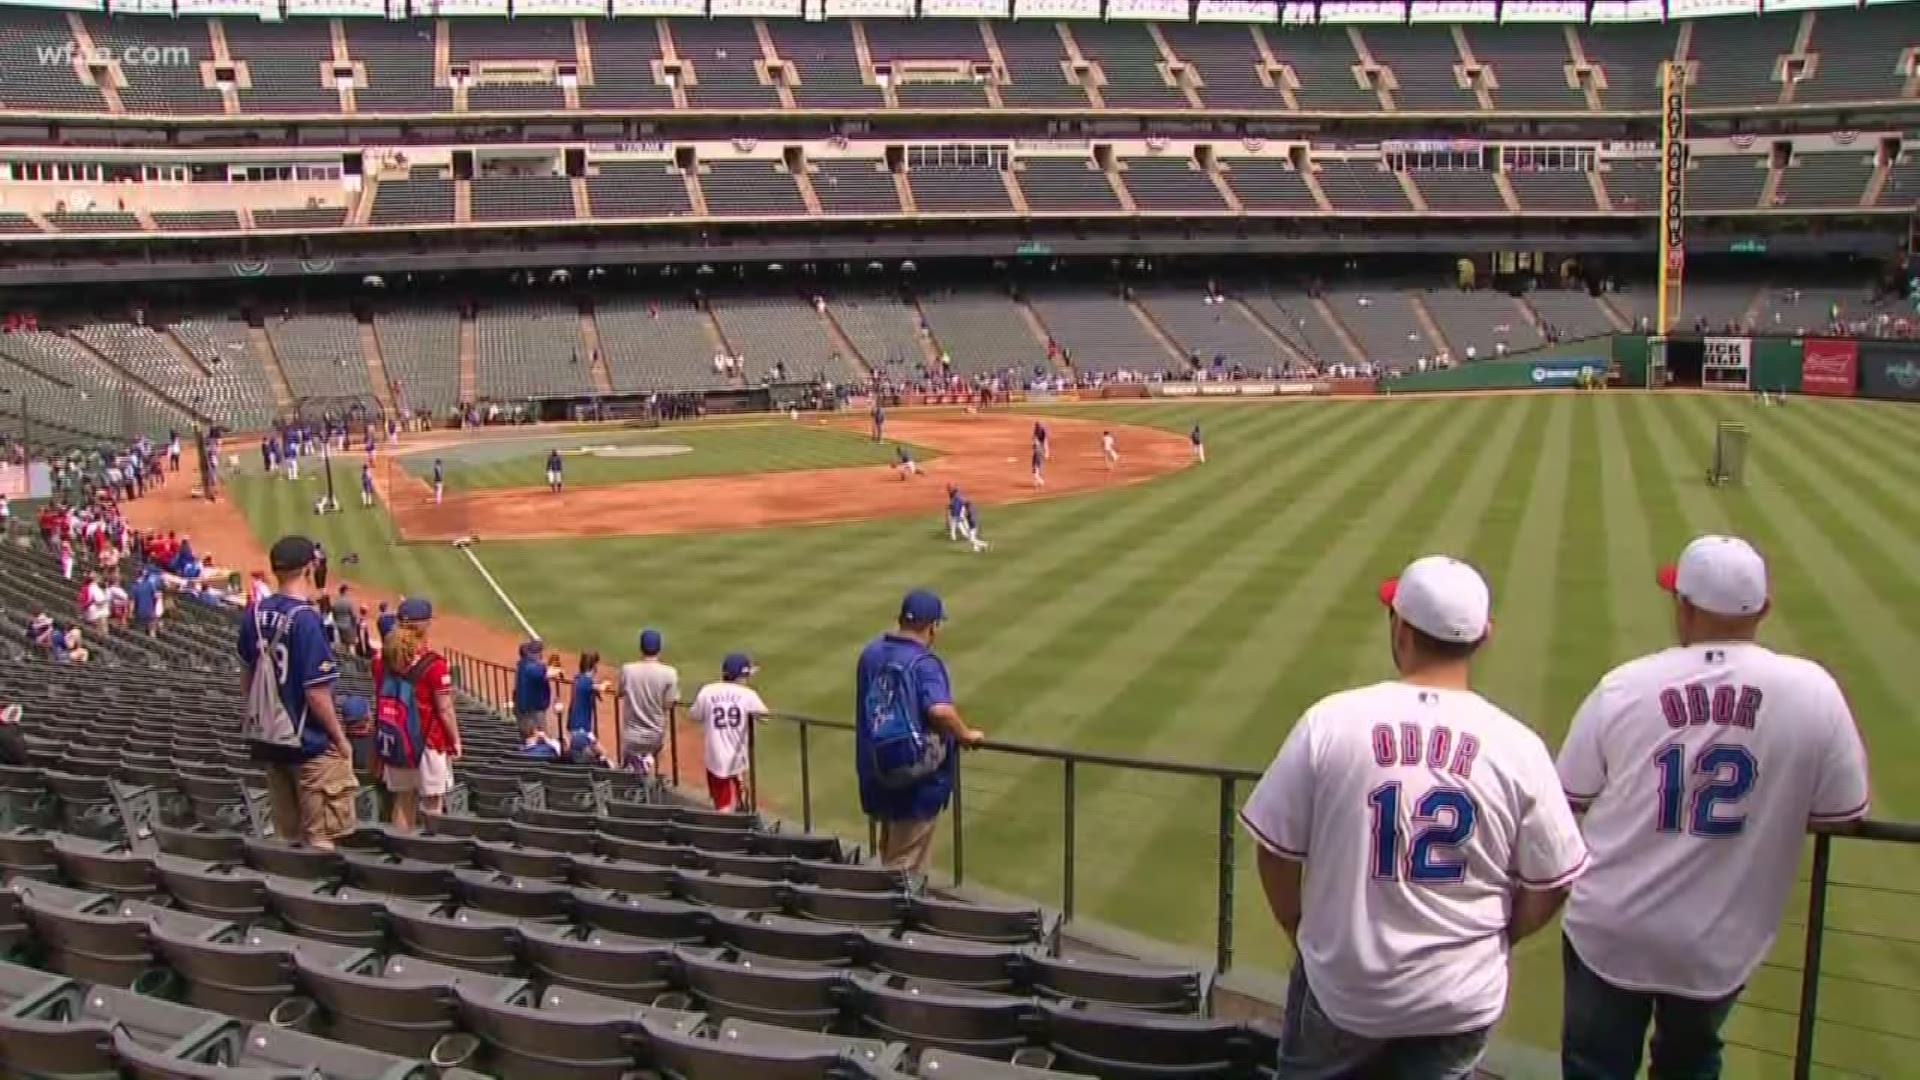 There's onl one week of baseball left at Globe Life Park. Tickets are cheap if you want to make one final visit to the site where the Texas Rangers have made history